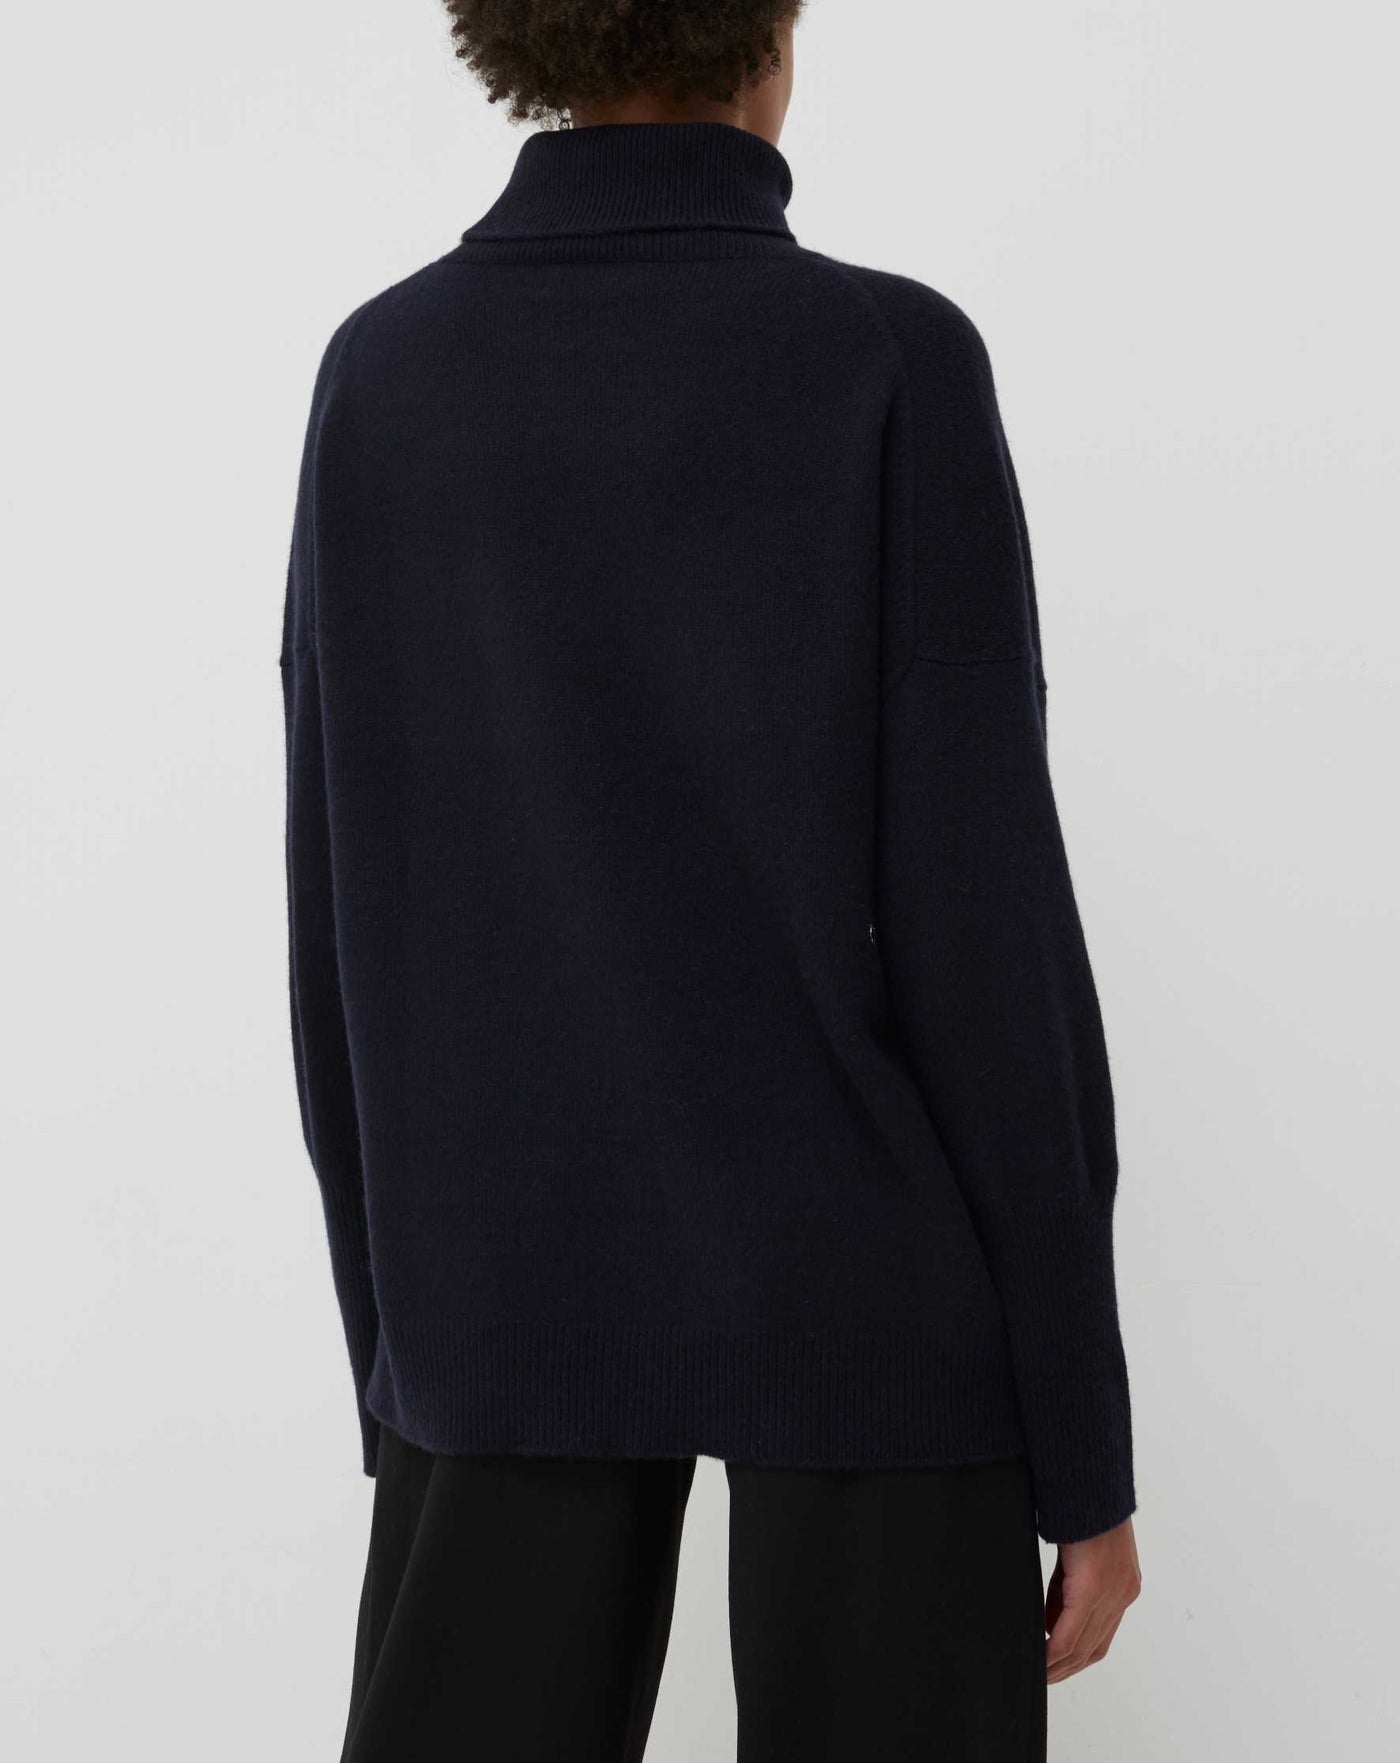 Navy Cashmere Rollneck Sweater